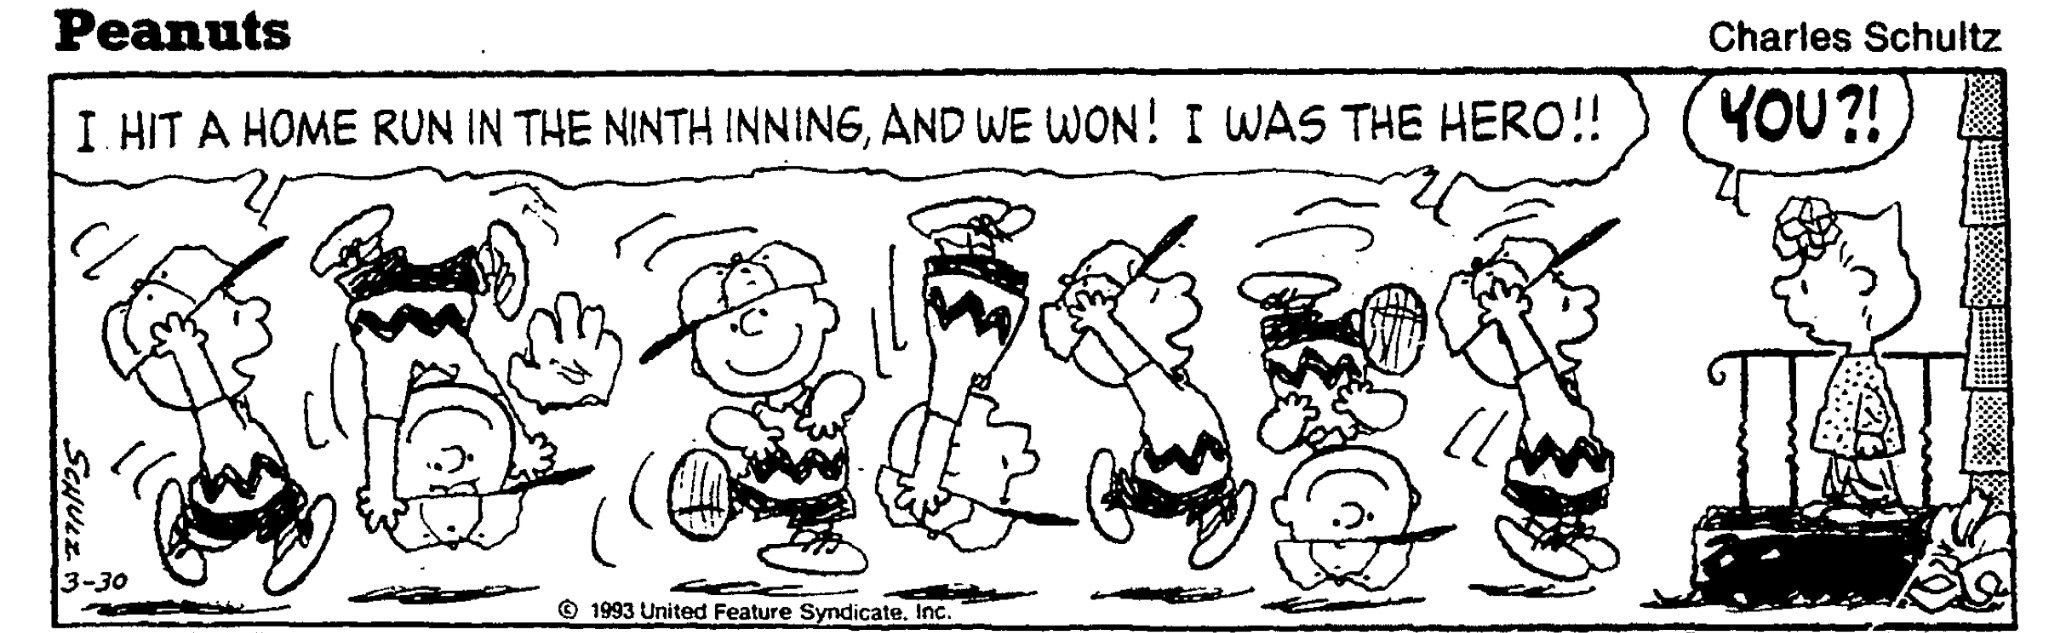 Image result for 1993 - In the Peanuts comic strip, Charlie Brown hit his first home run.